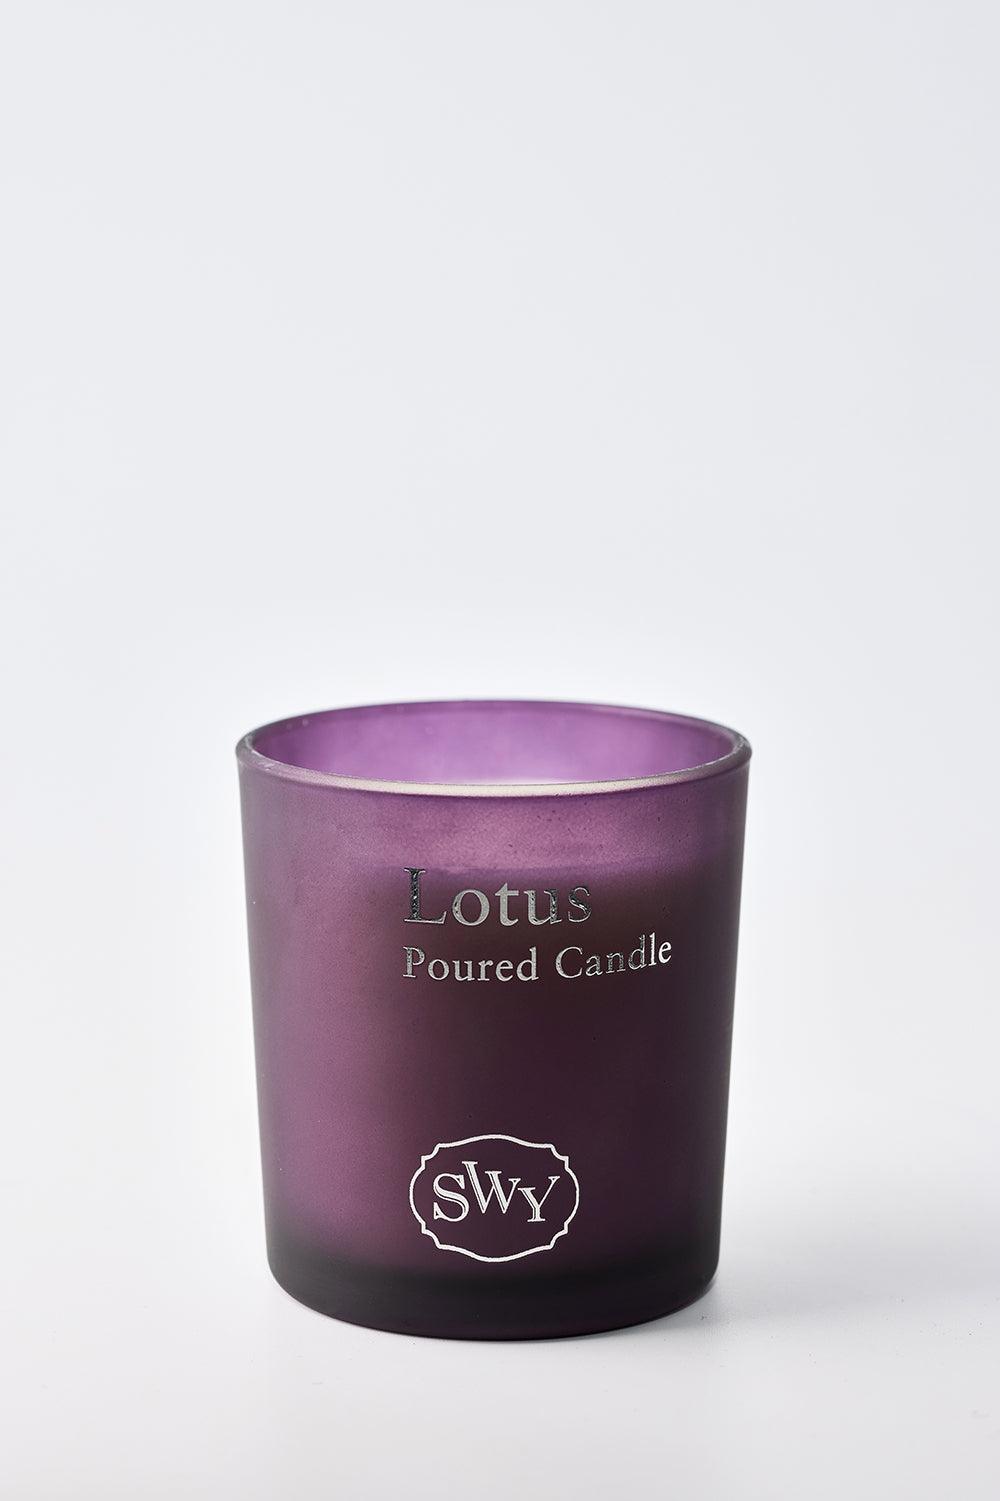 Poured Candle – Lotus - SWY - Scent With You